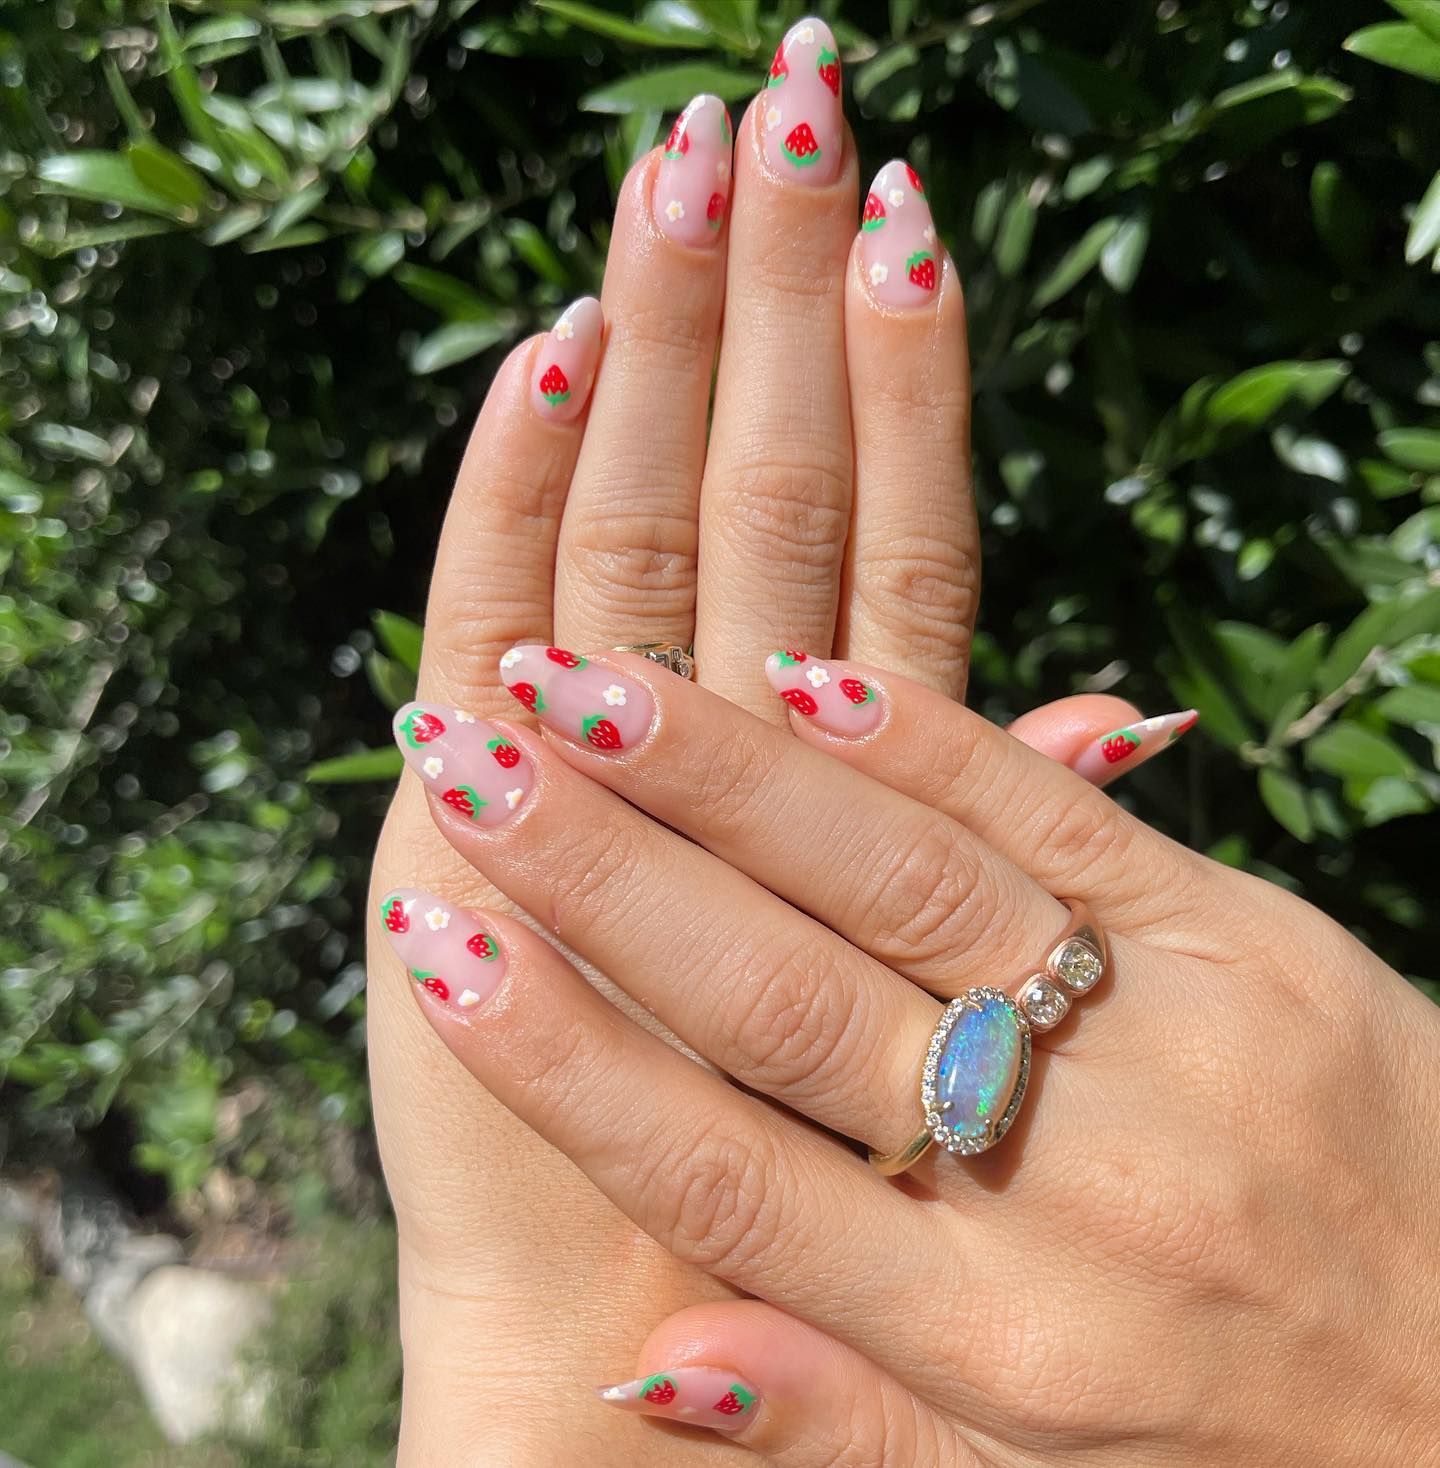 33 Ideas For Summer Nails - Brit + Co